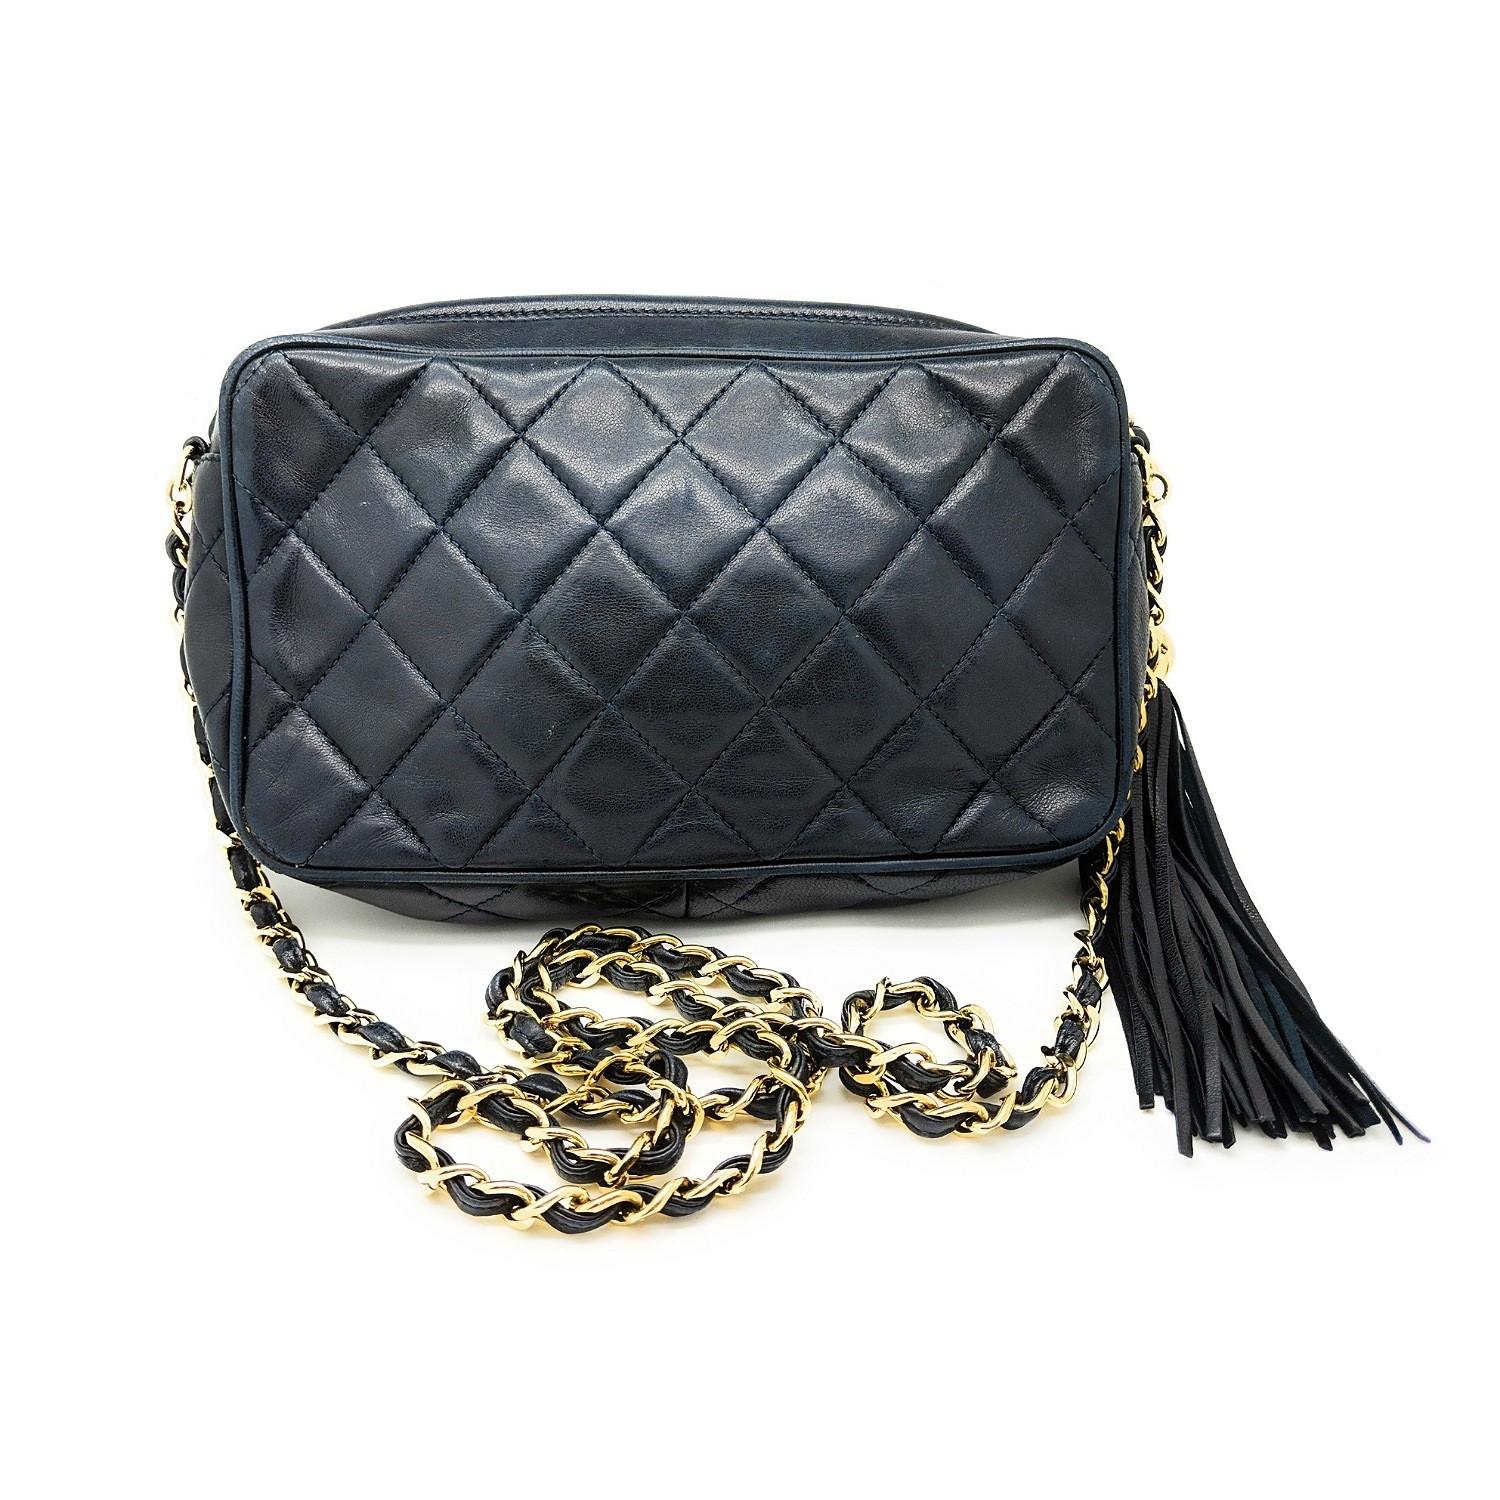 This is a chic shoulder bag that is finely crafted of dark blue diamond quilted lambskin leather. The bag features a gold chain link and leather shoulder strap and a zipper that opens to a leather interior with a zipper pocket. This is an excellent